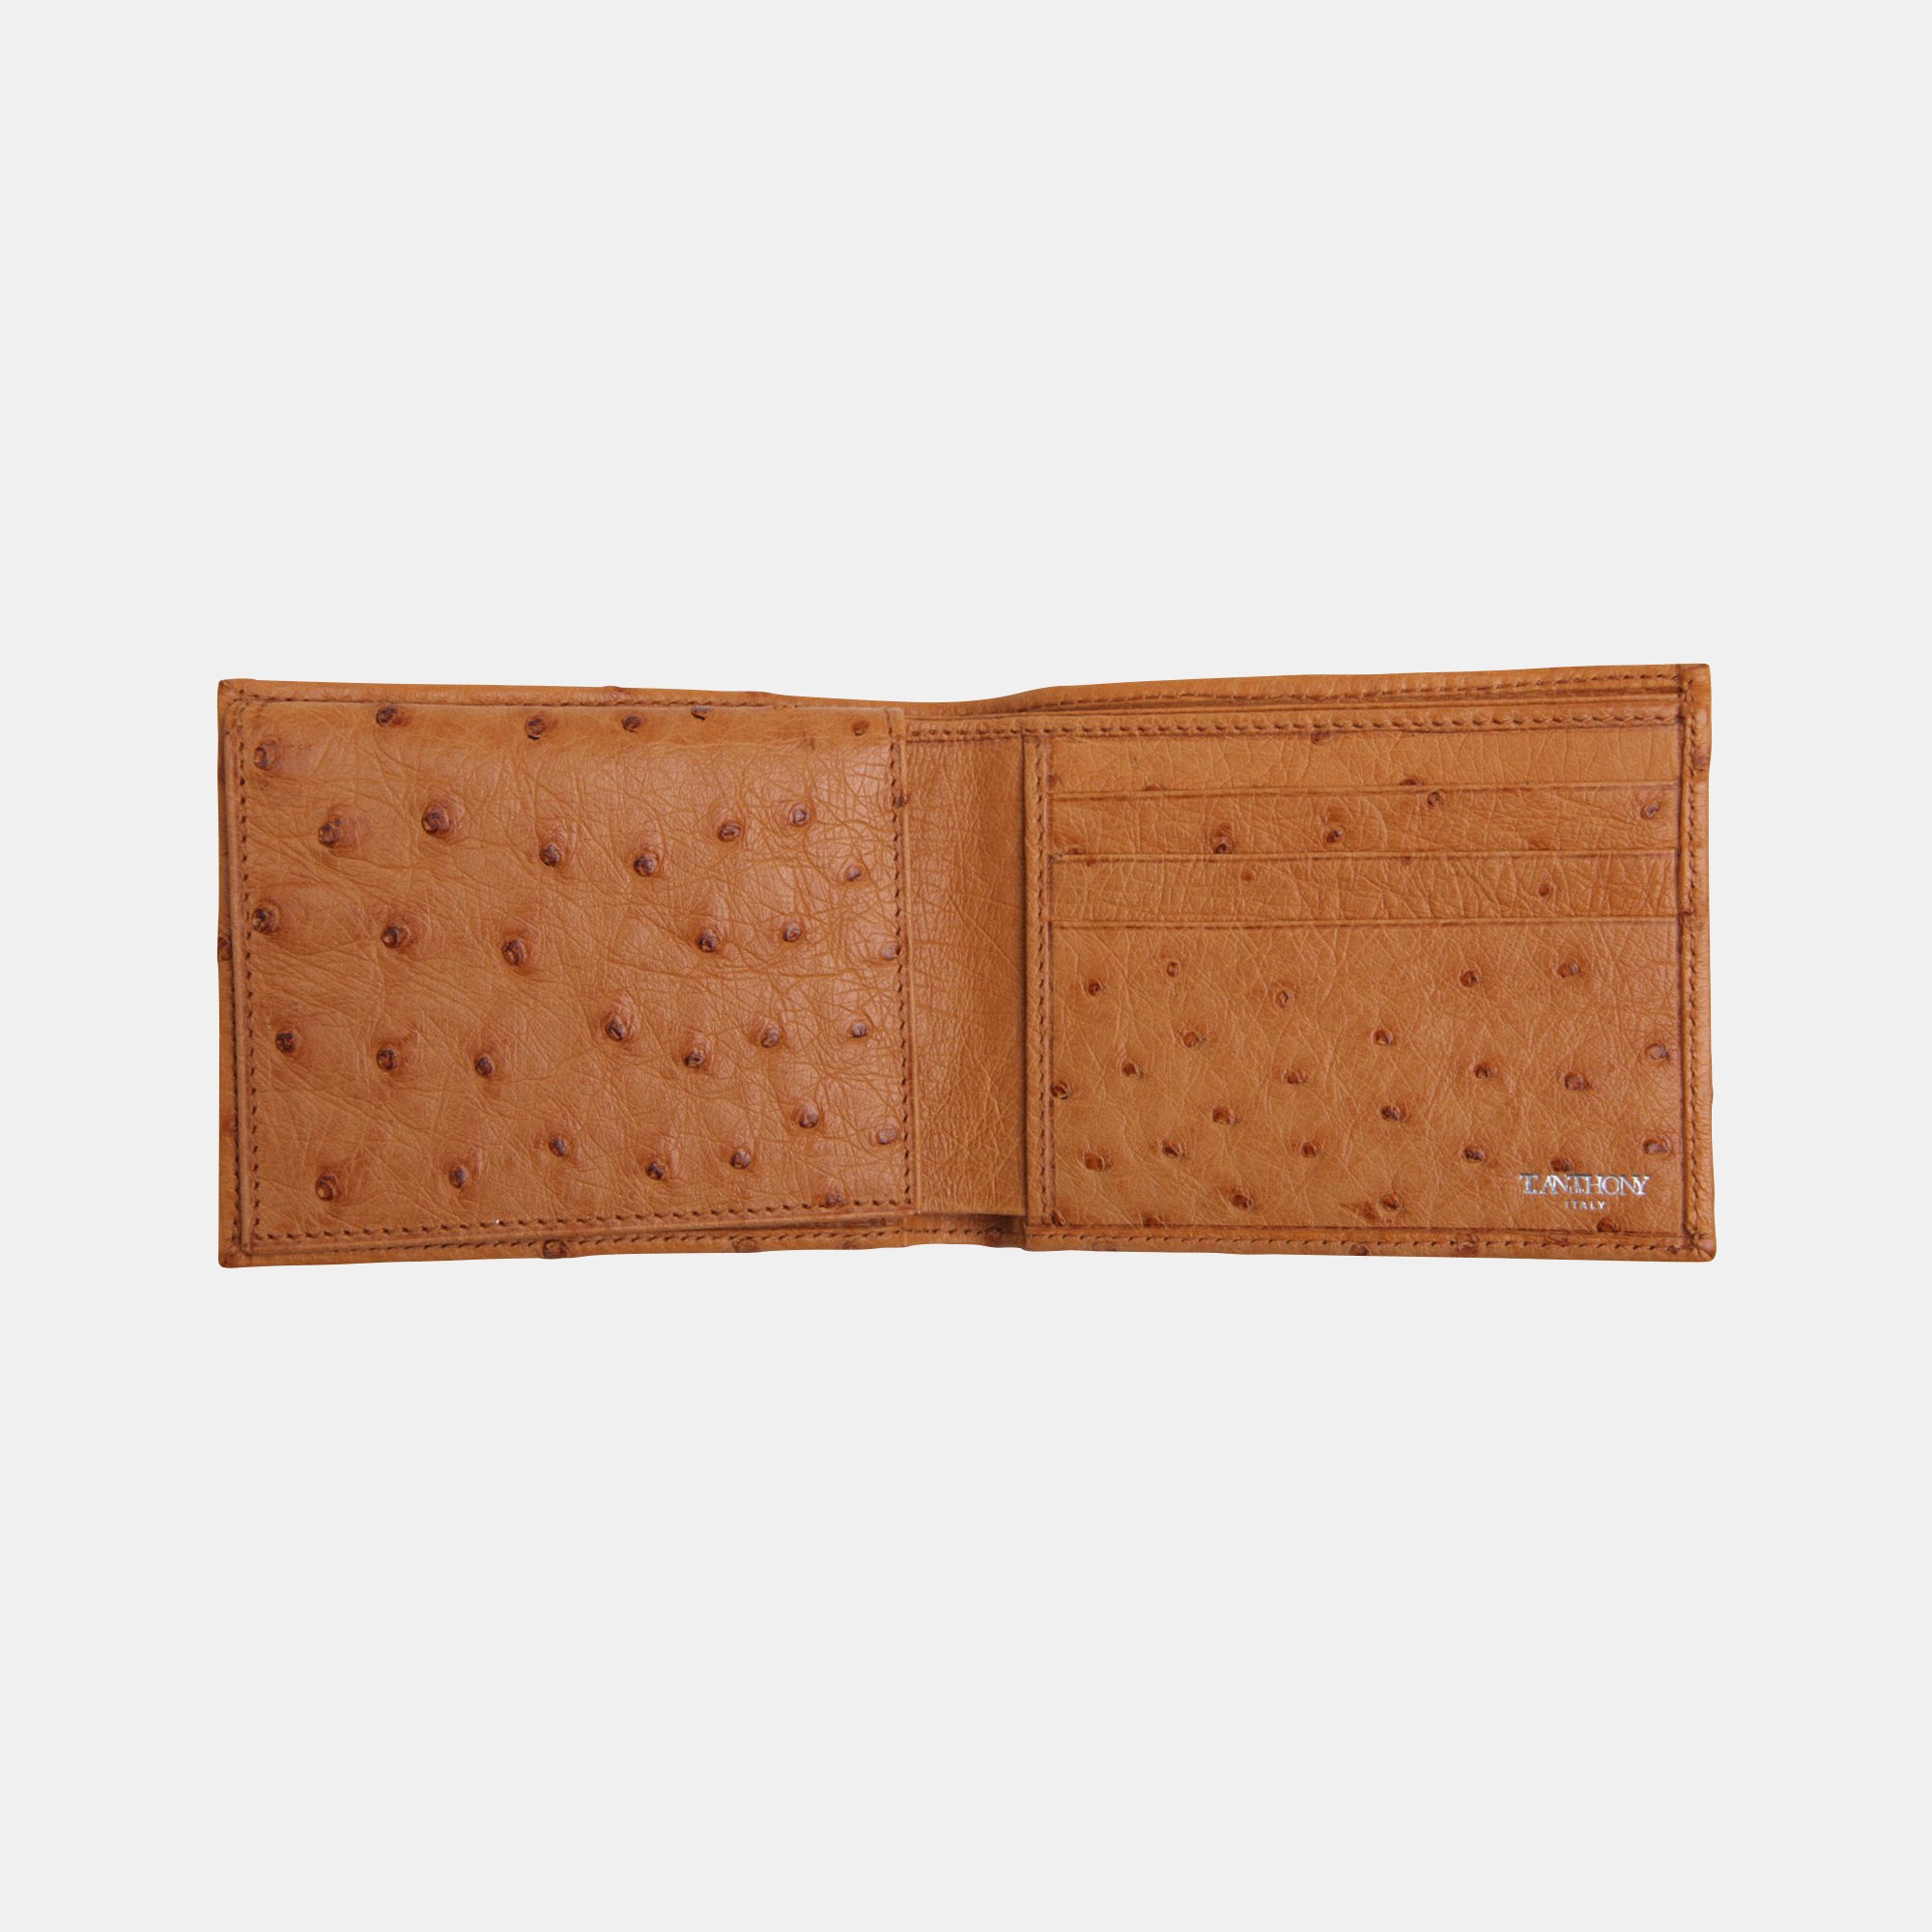 Genuine Ostrich Leather Cover Flip Book Wallet Style